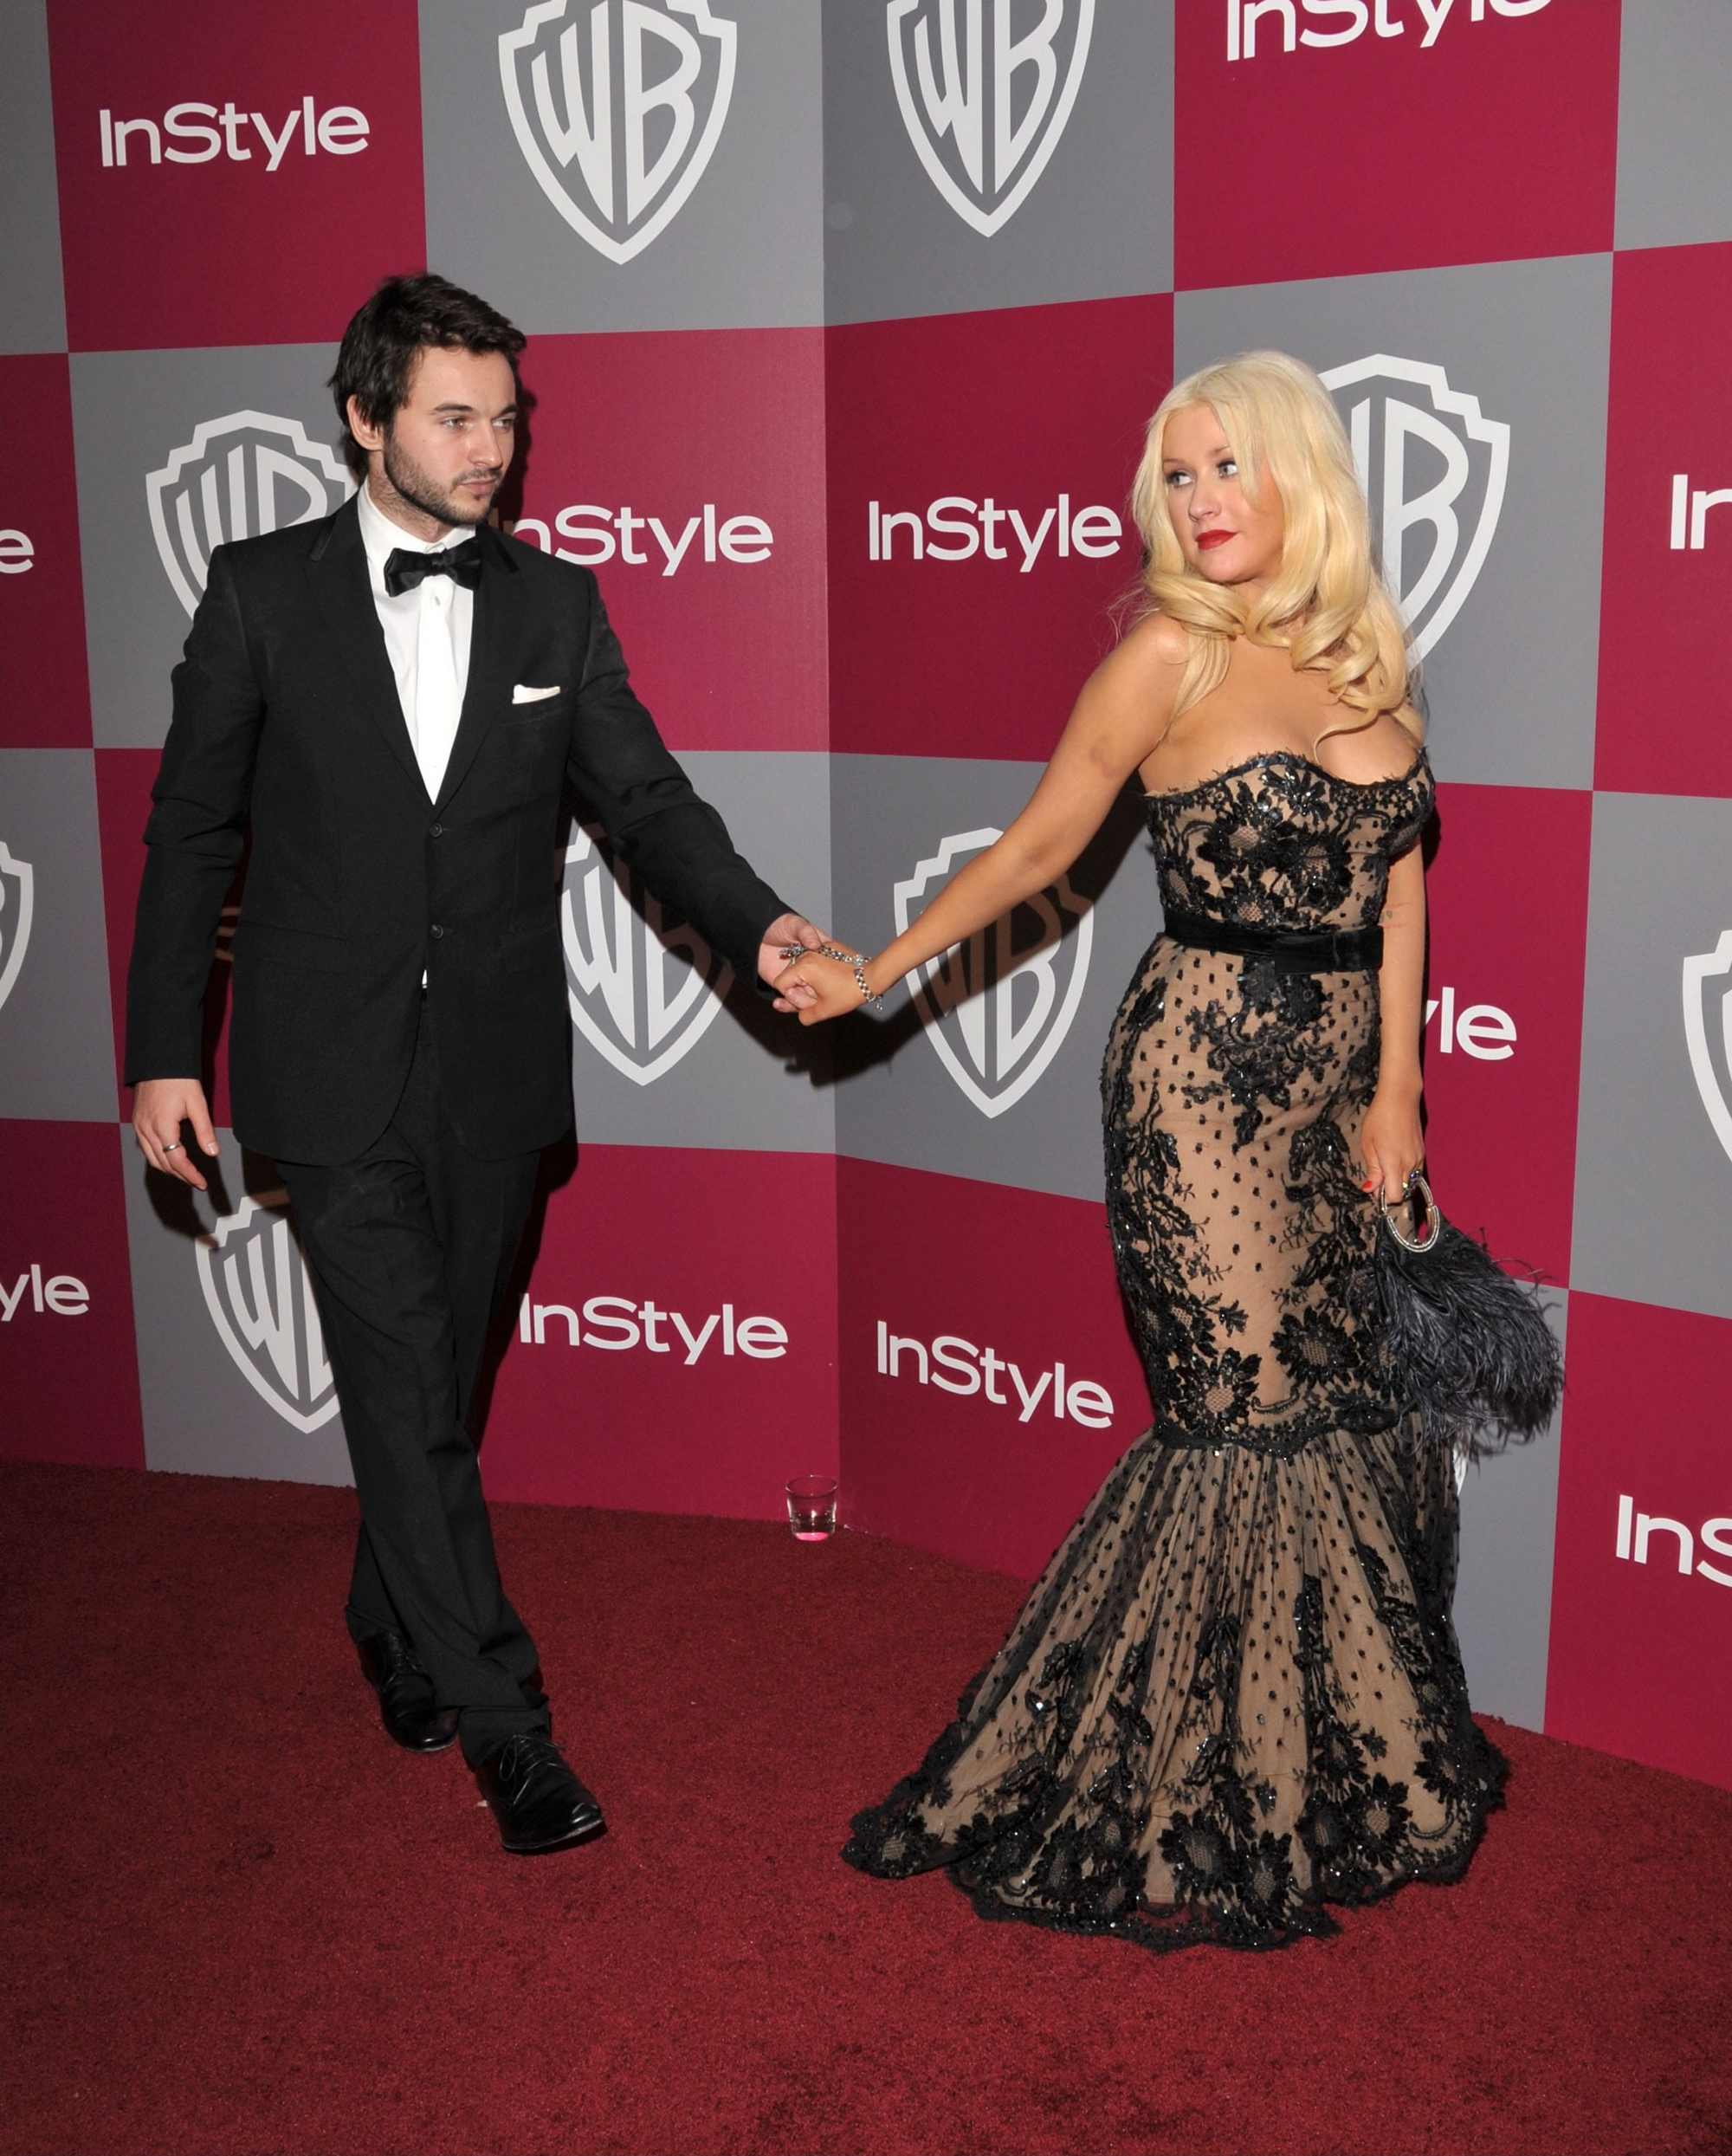 InStyle_and_Warner_Bros__68th_Annual_Golden_Globe_Awards_5BArriving5D_-_January_16-16.jpg